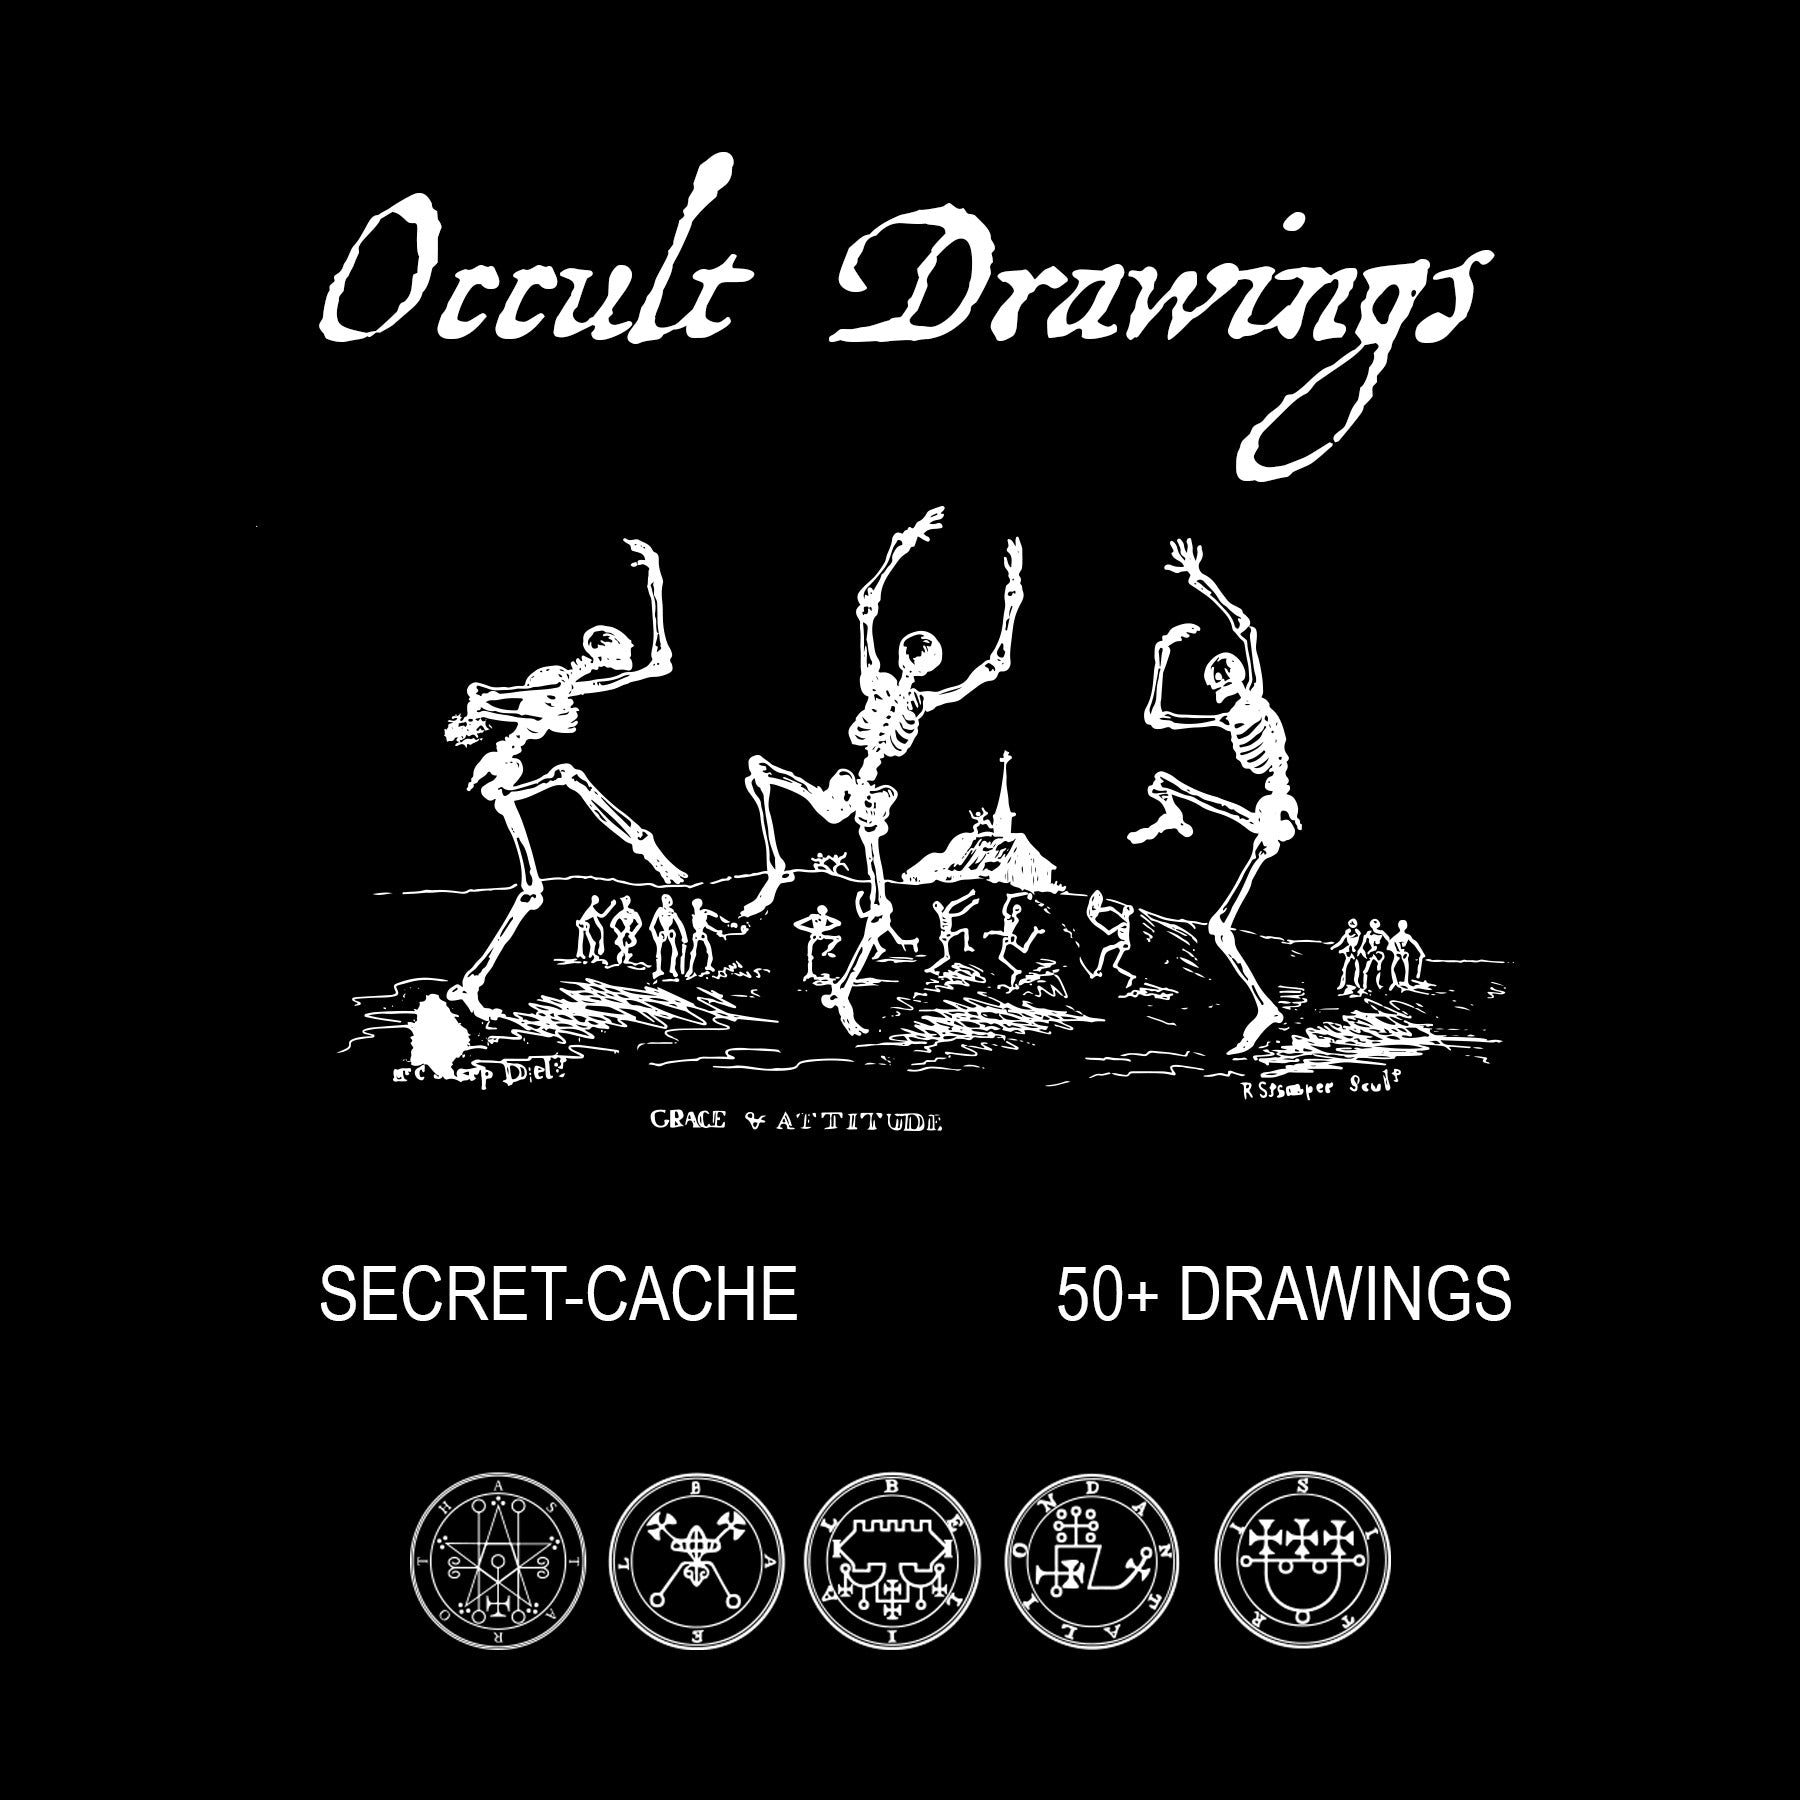 Occult Drawings